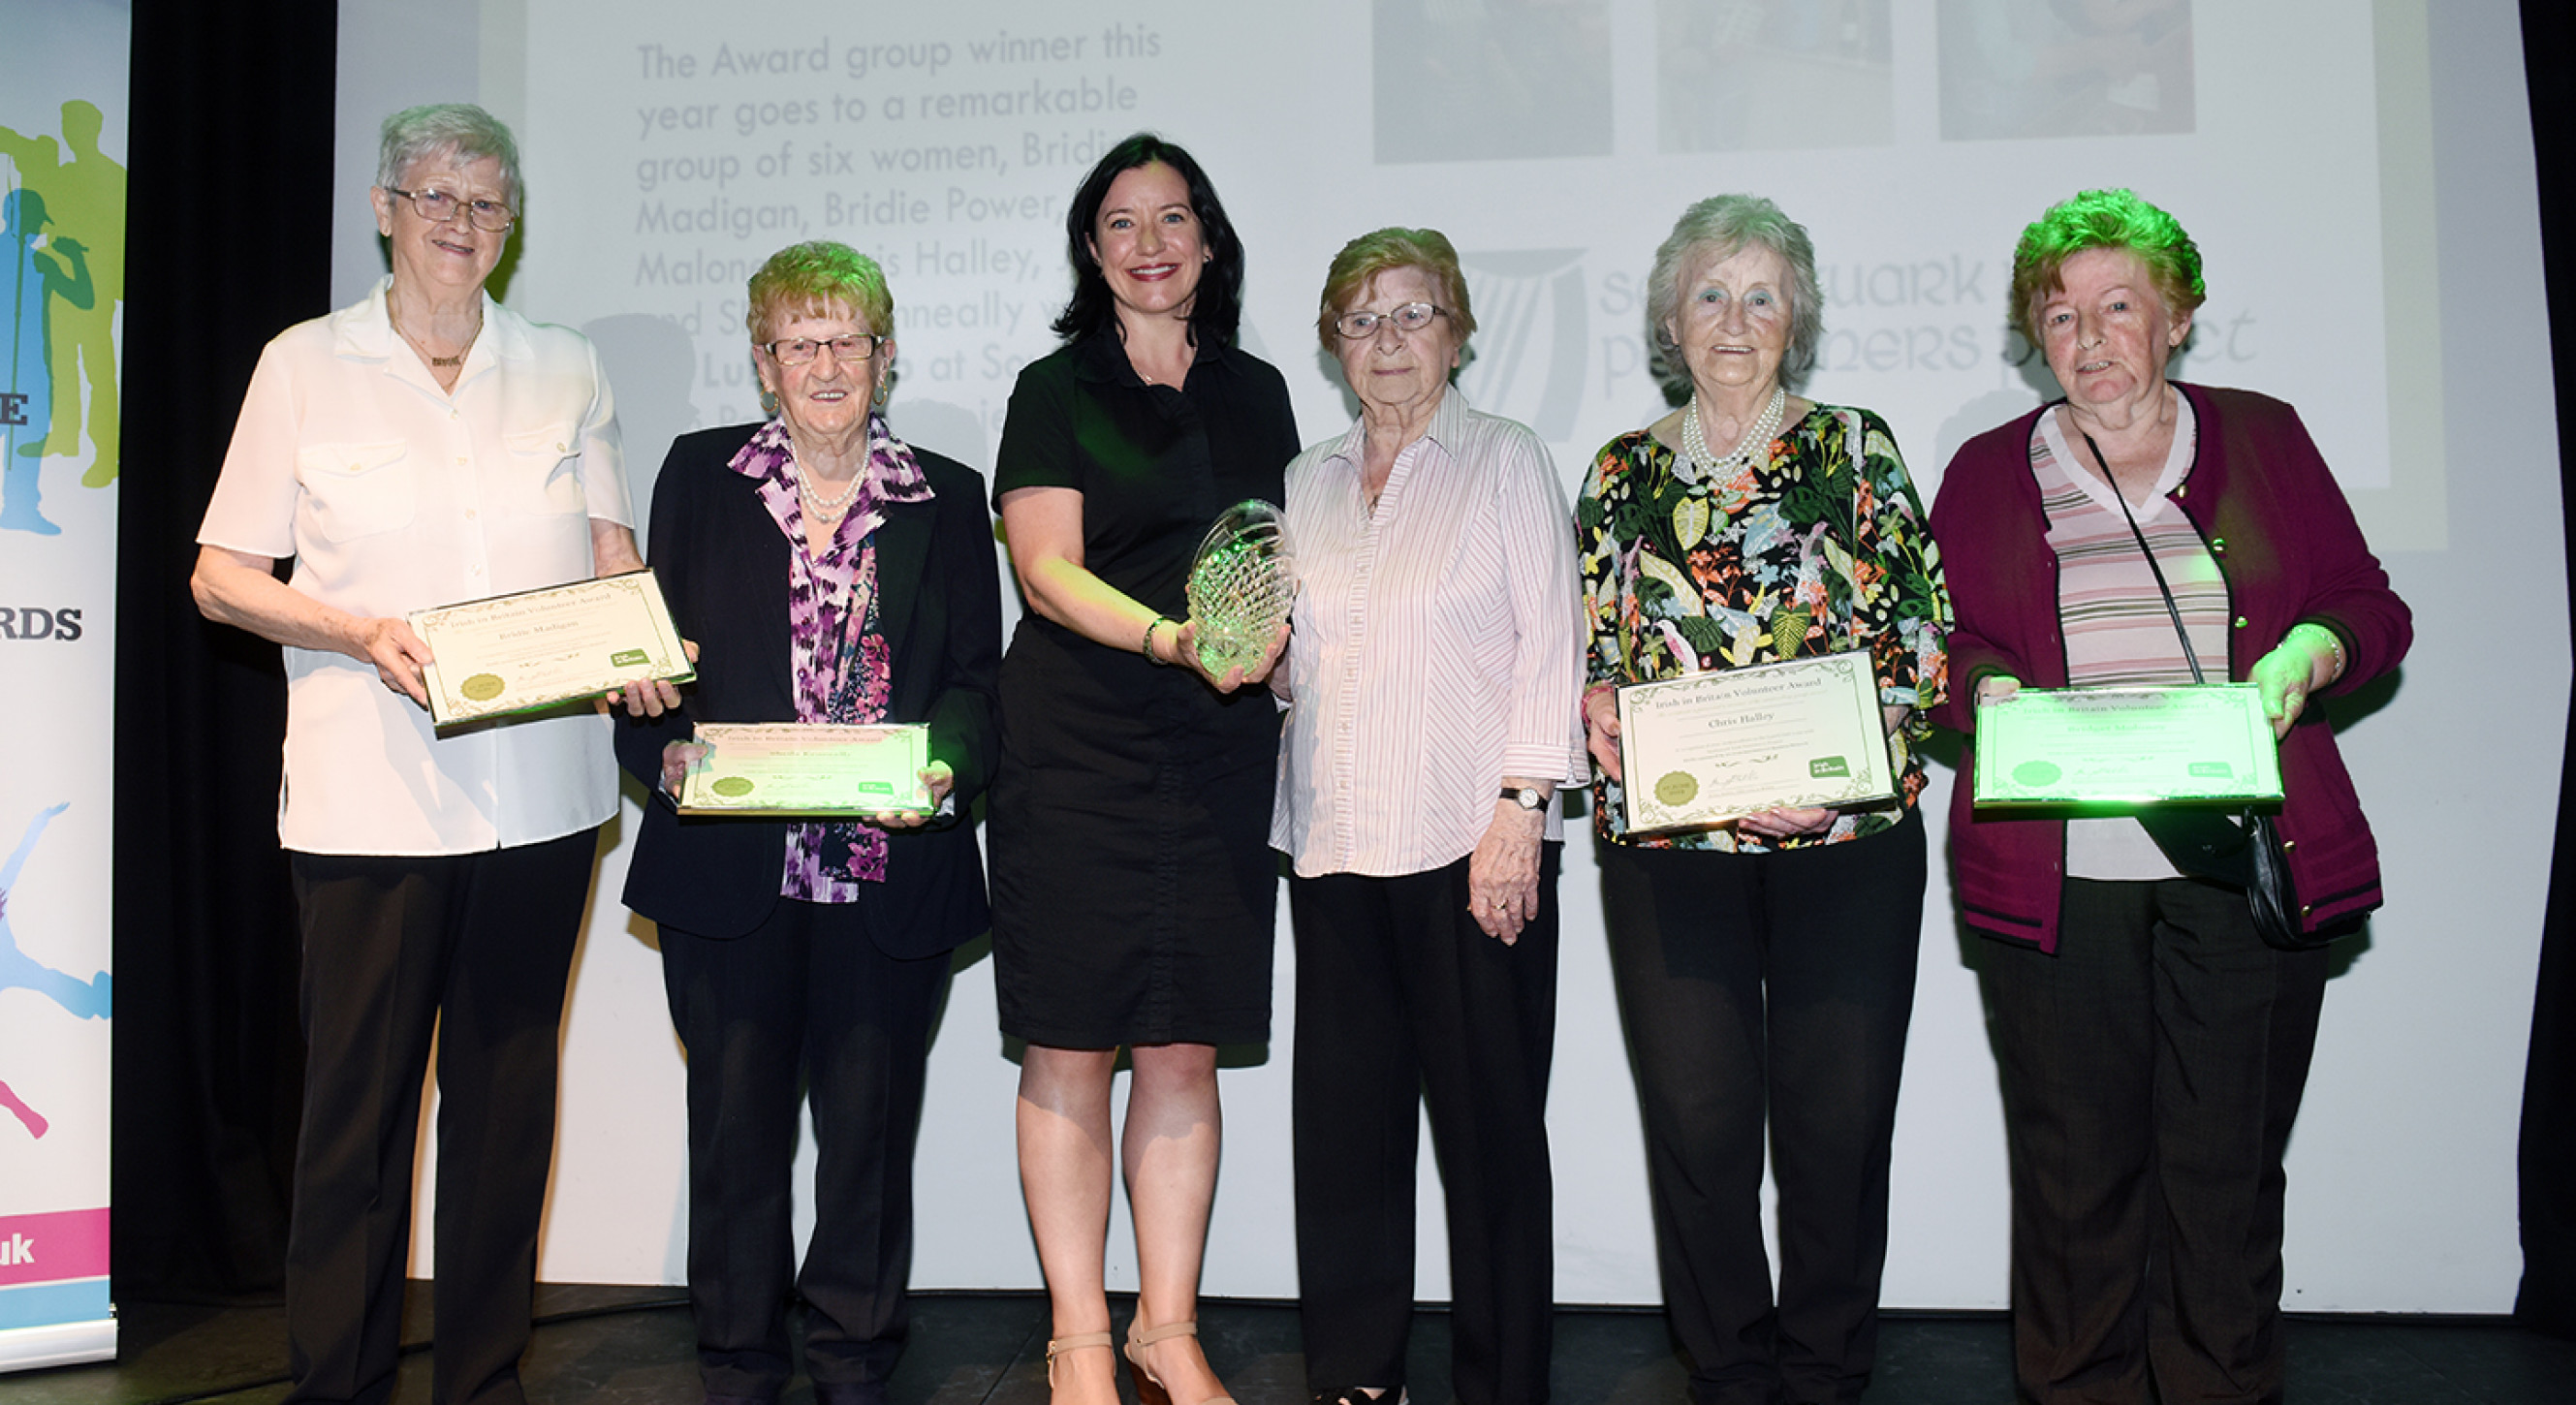 The Luncb Club group from the Southwark Irish Pensioners Project: winners of the group award